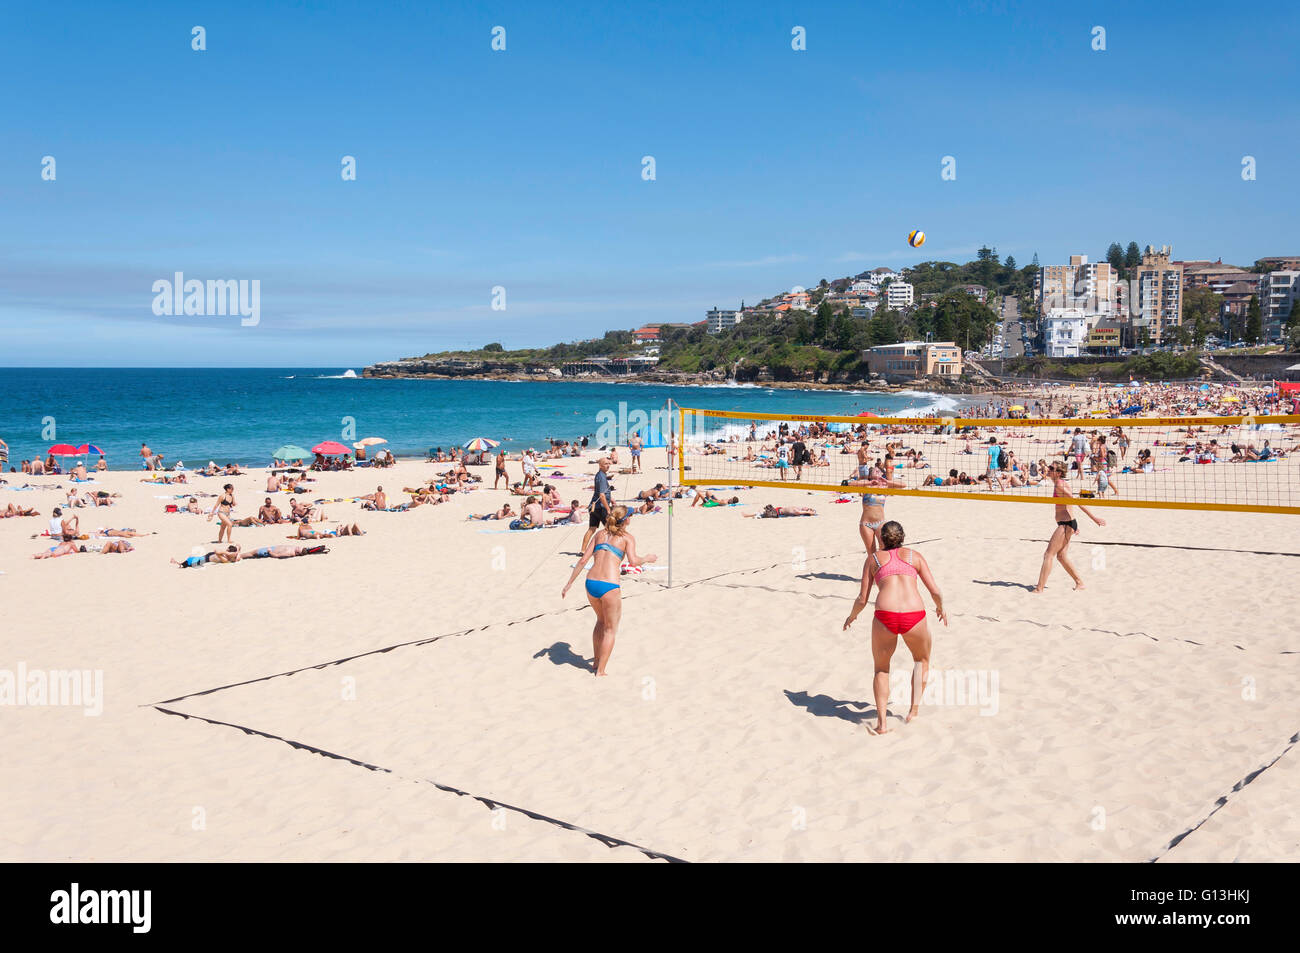 Women playing beach volleyball on Coogee Beach, Coogee, Sydney, New South Wales, Australia Stock Photo